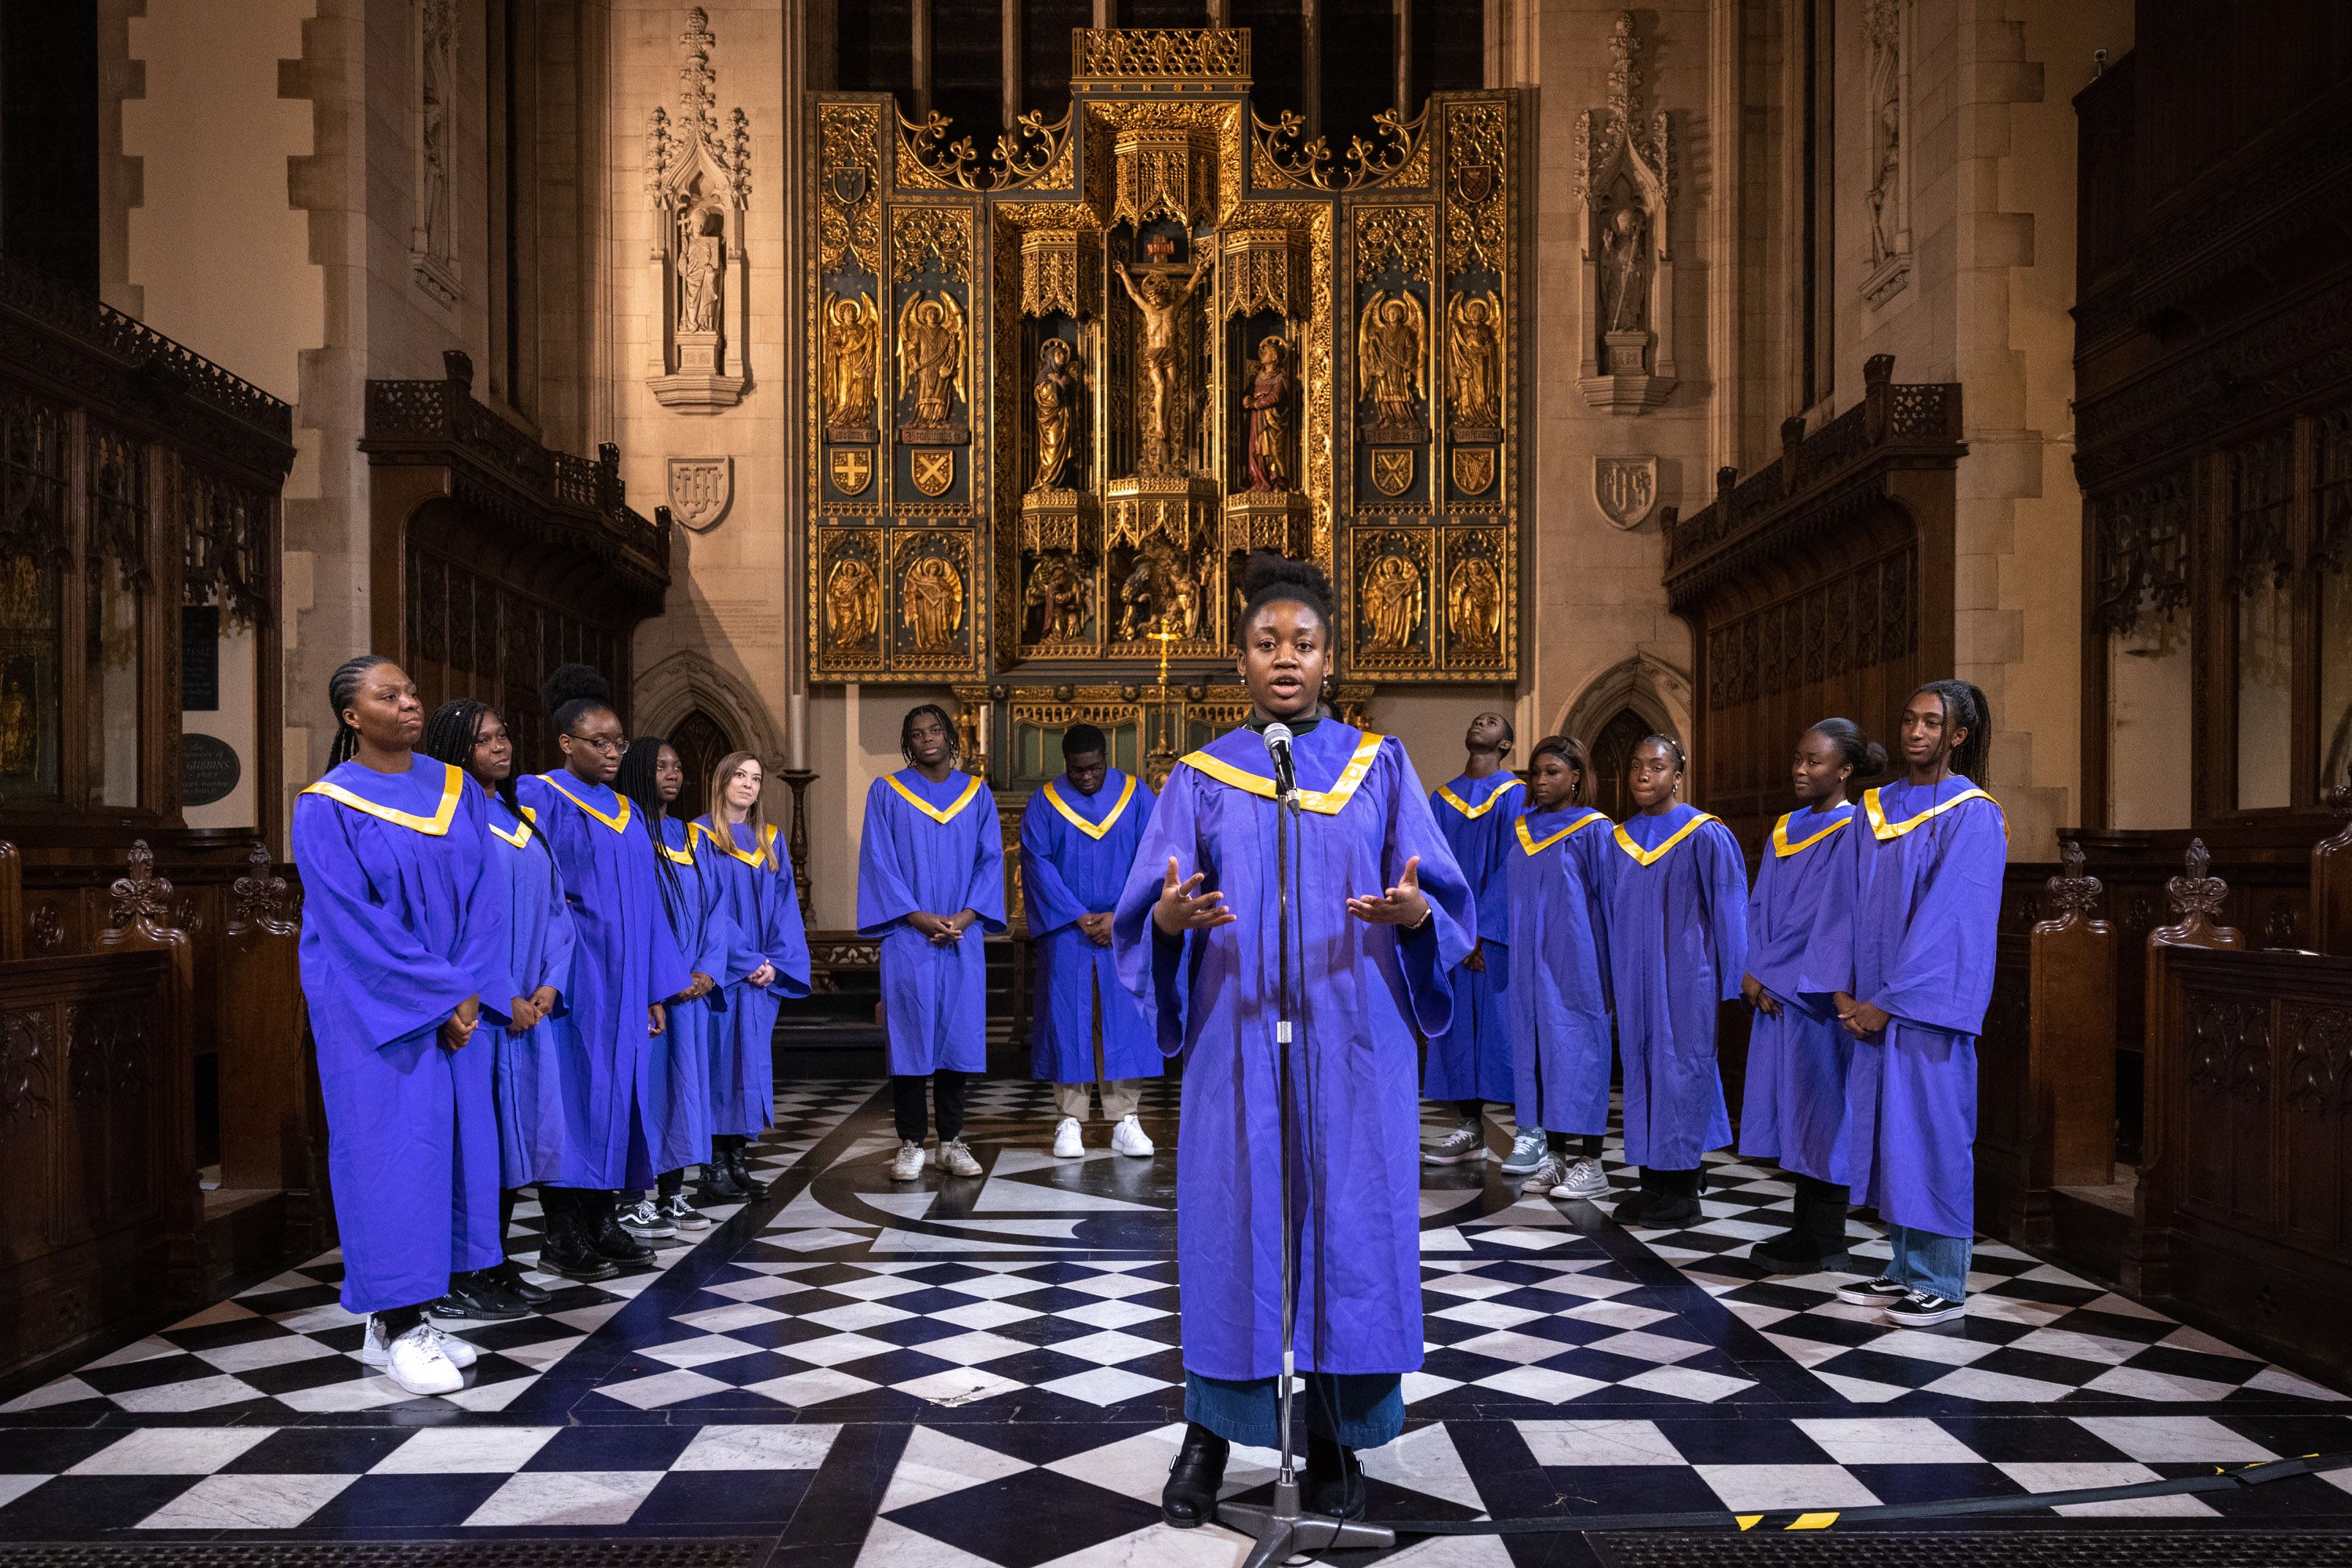 A group of singers dressed in purple performing in an ornate church